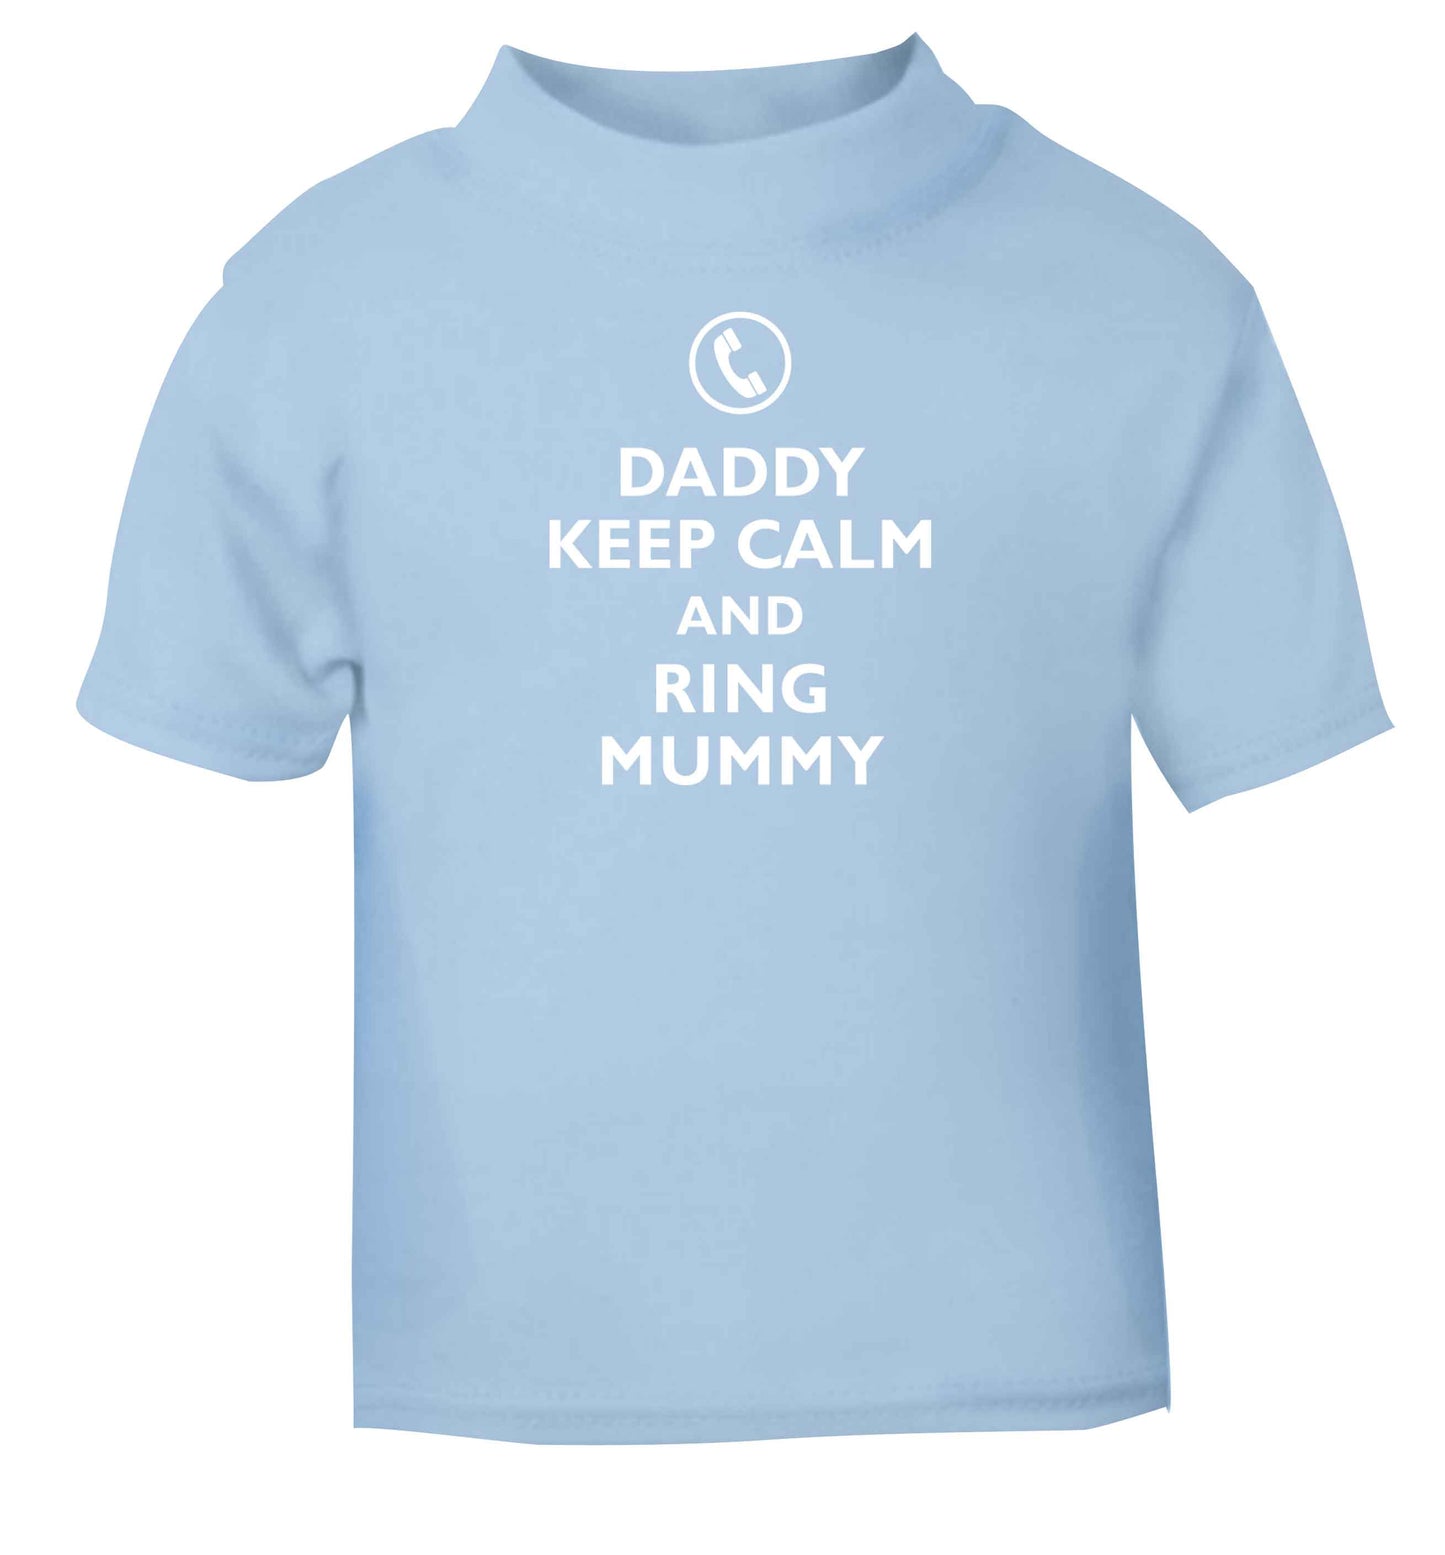 Daddy keep calm and ring mummy light blue baby toddler Tshirt 2 Years